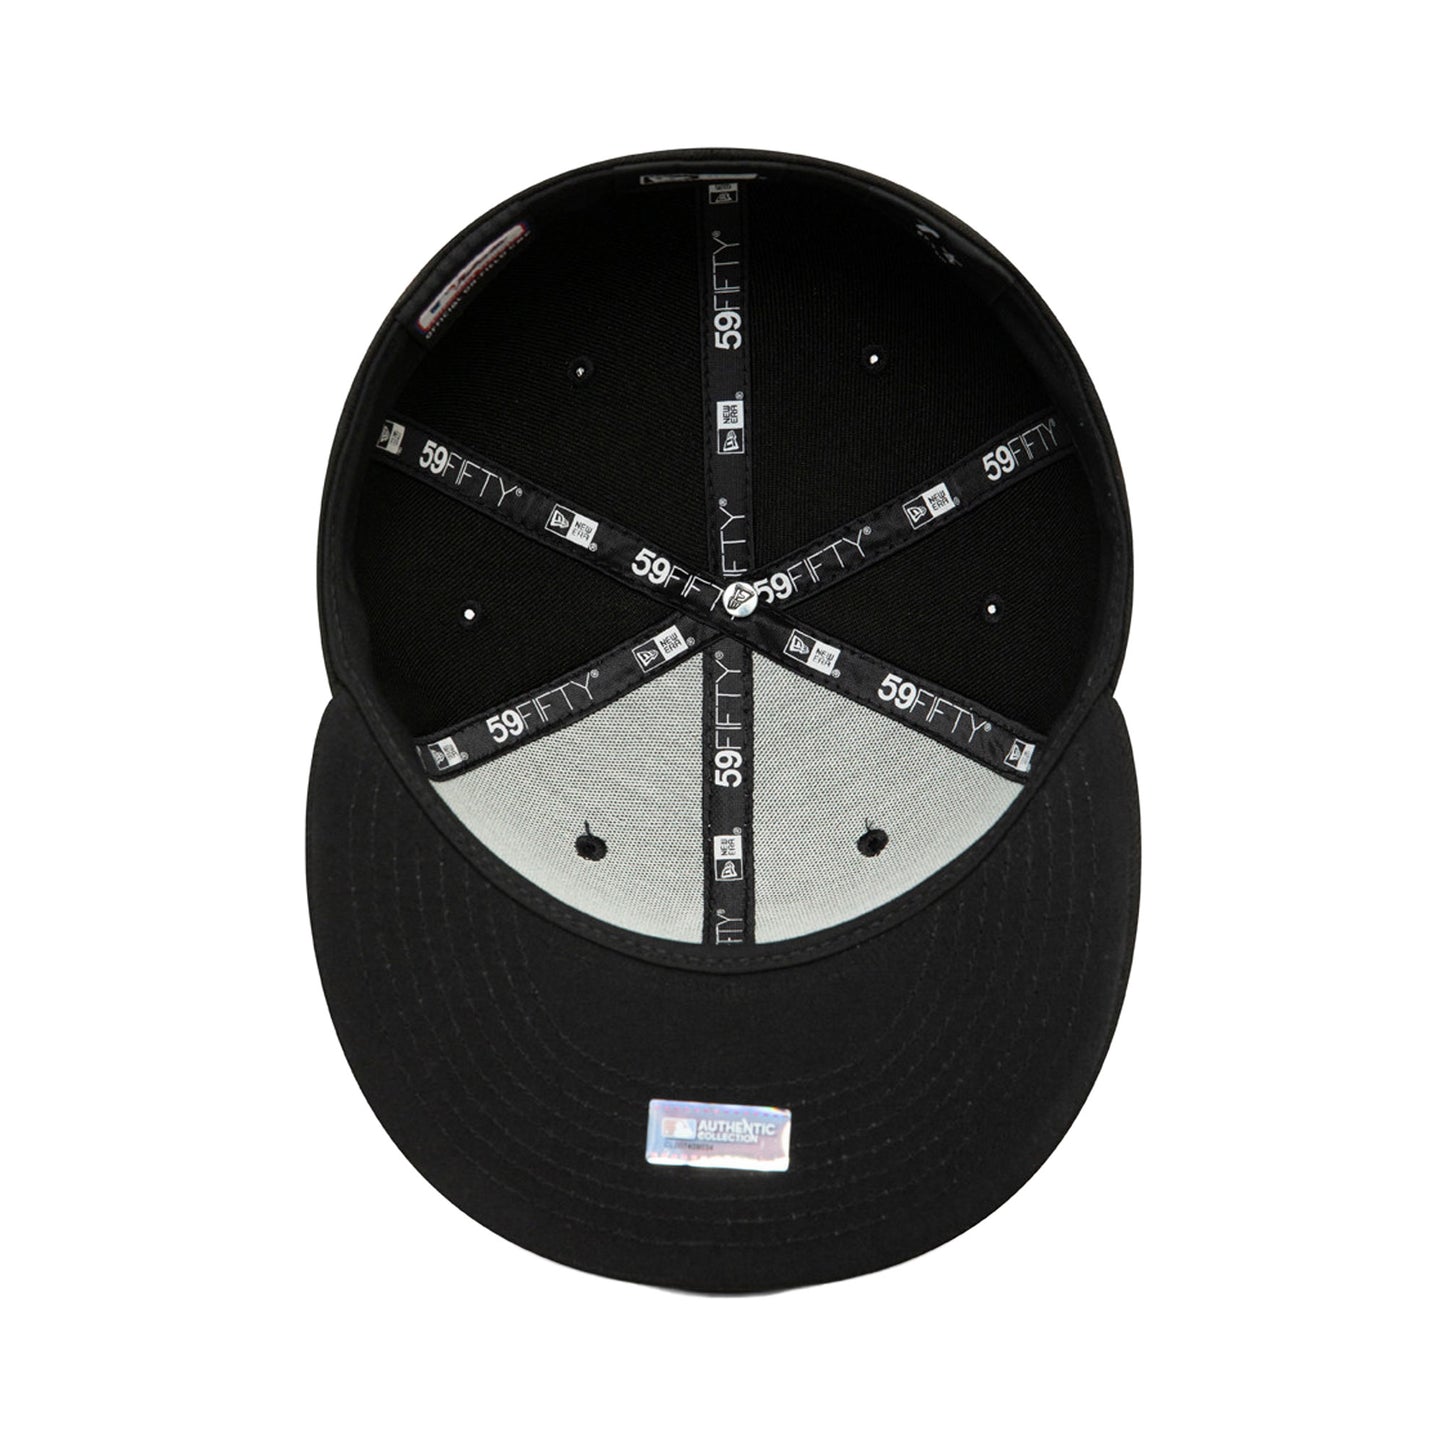 Chicago White Sox Authentic New Era 59FIFTY Cap